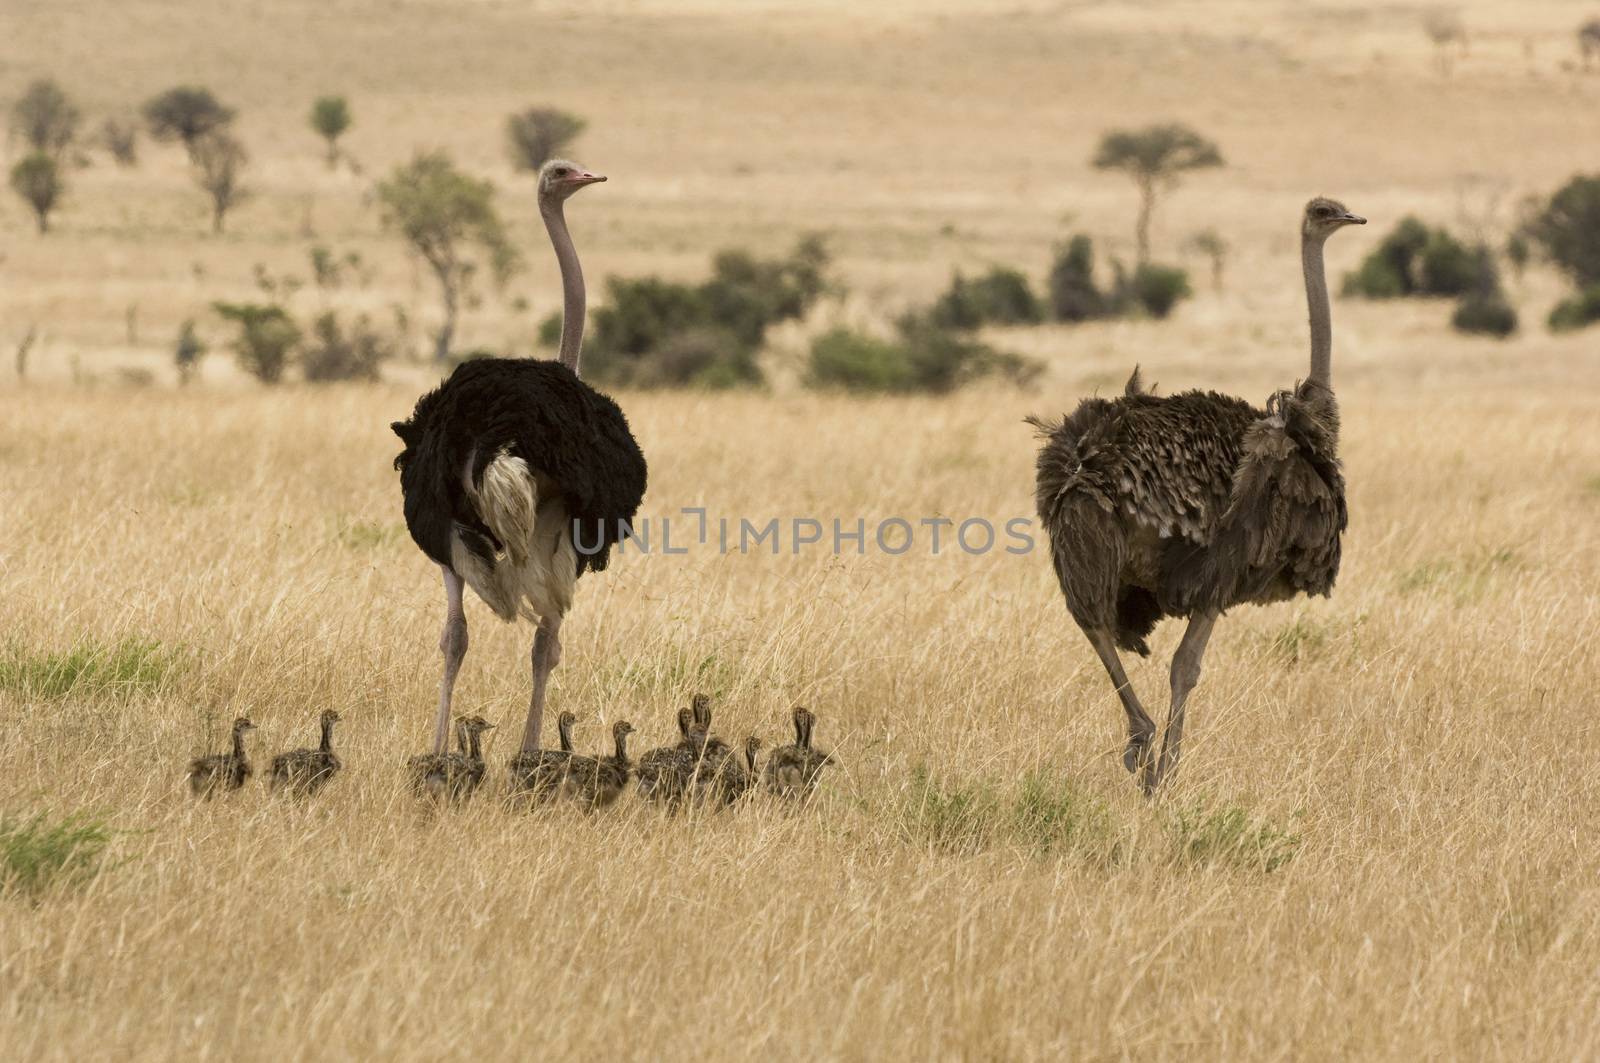 Two ostriches (Struthio camelus) with babies in savannah by moodboard